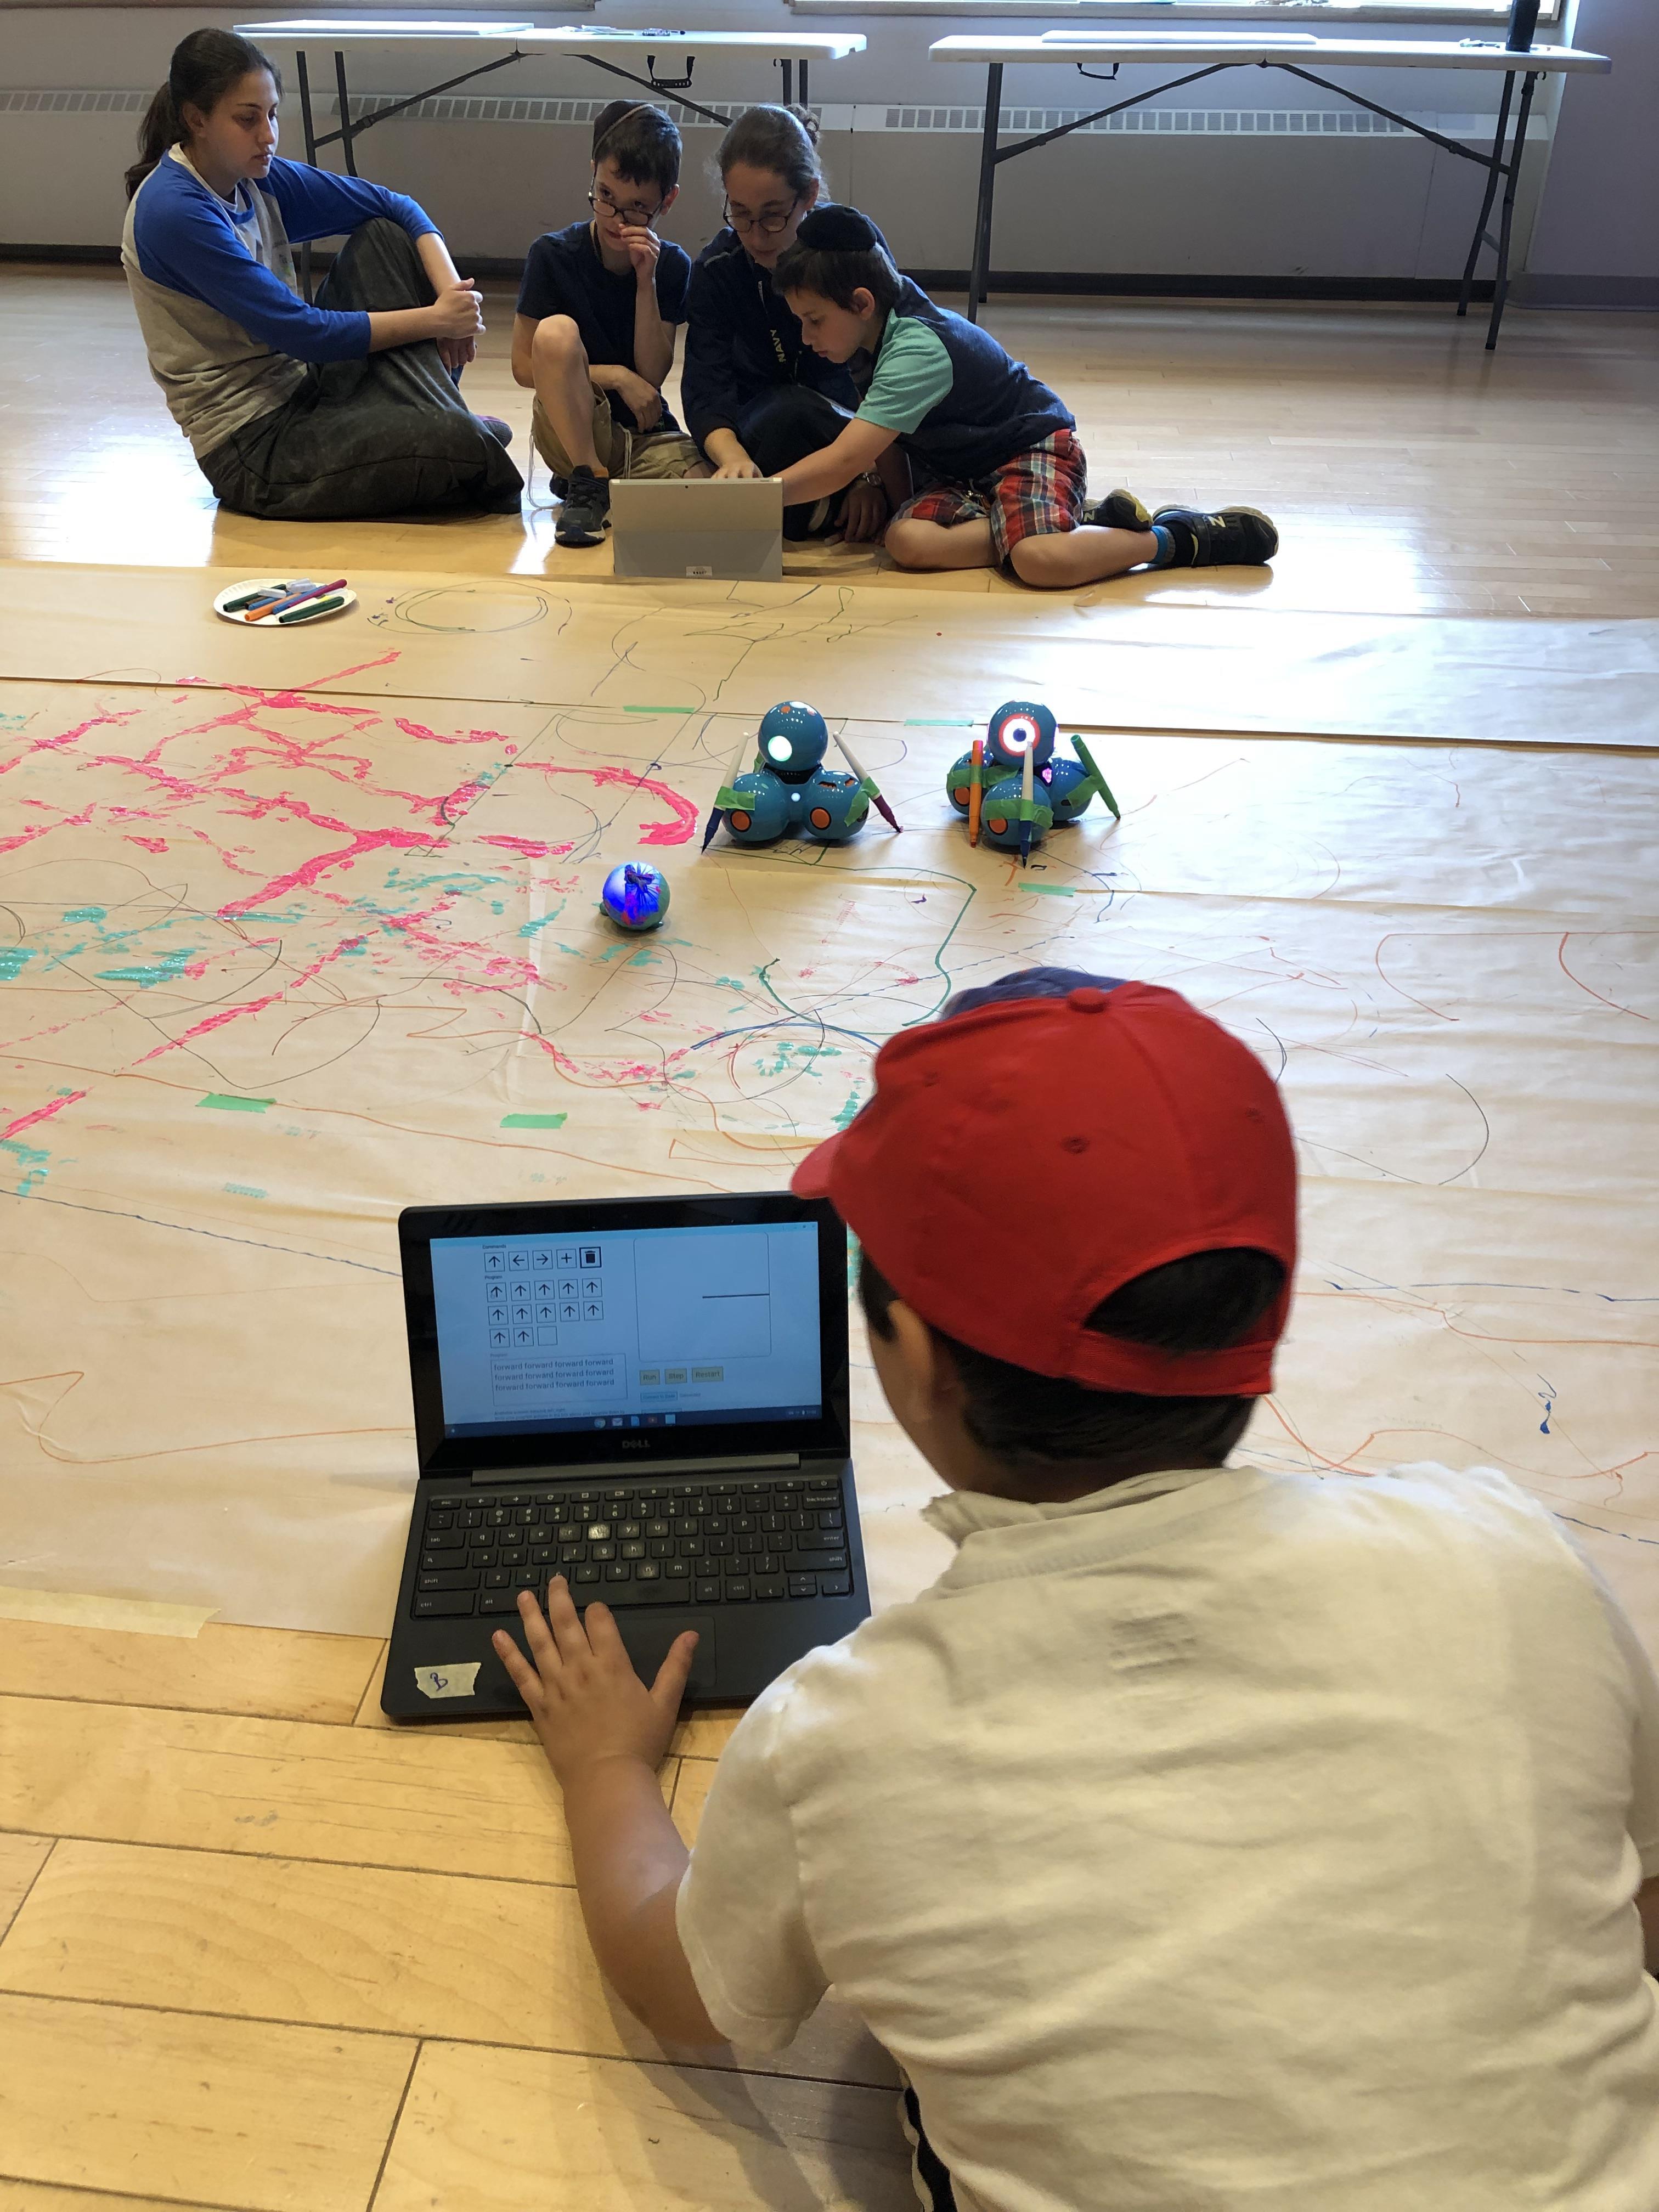 Facilitators and campers are working with the C2LC prototype on their laptops. They are creating programs for Dash and Sphero robots to draw shapes on large panels of paper taped on the floor. 